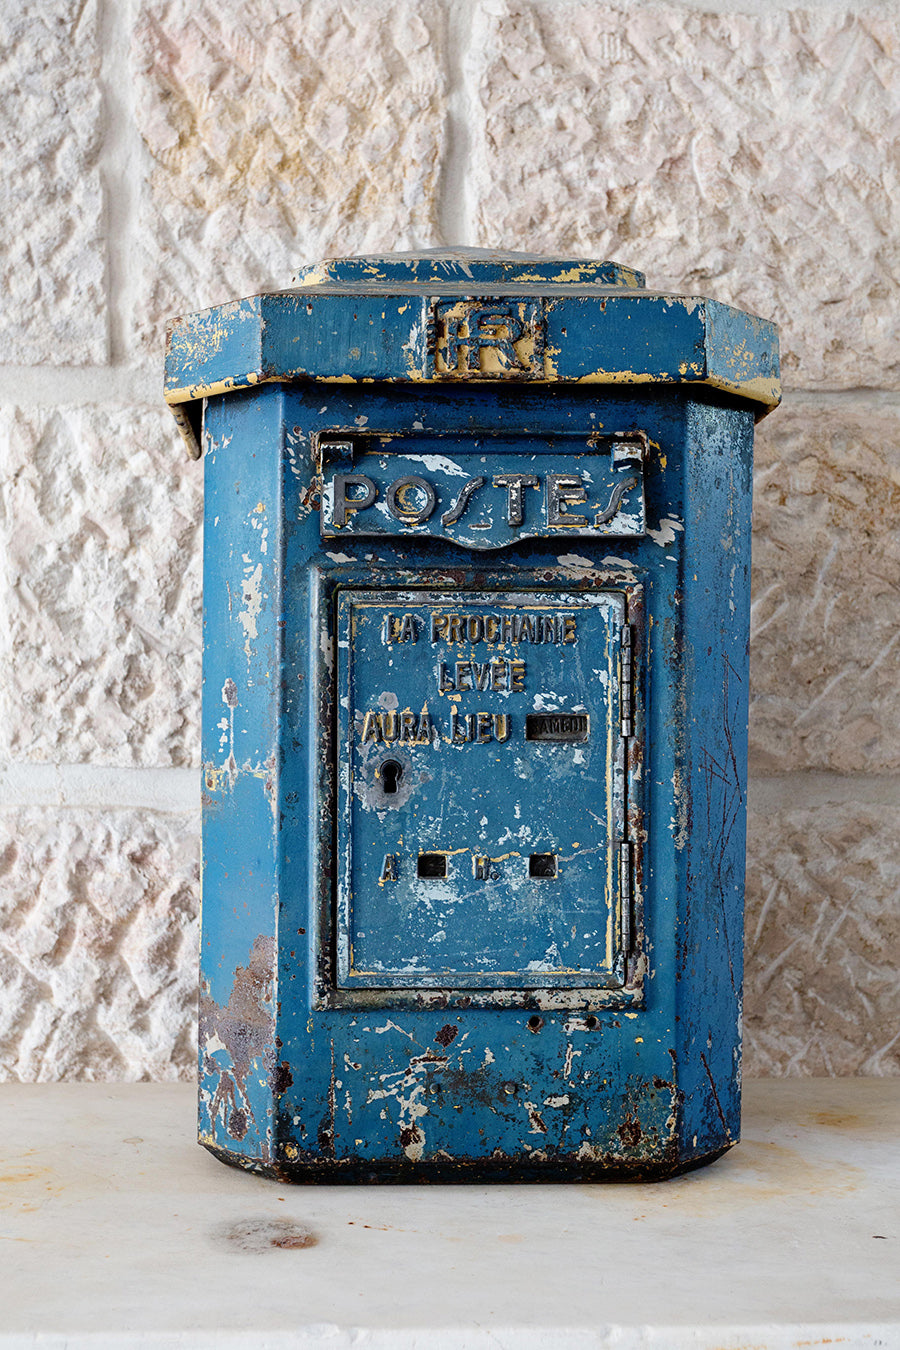 French antique letterbox